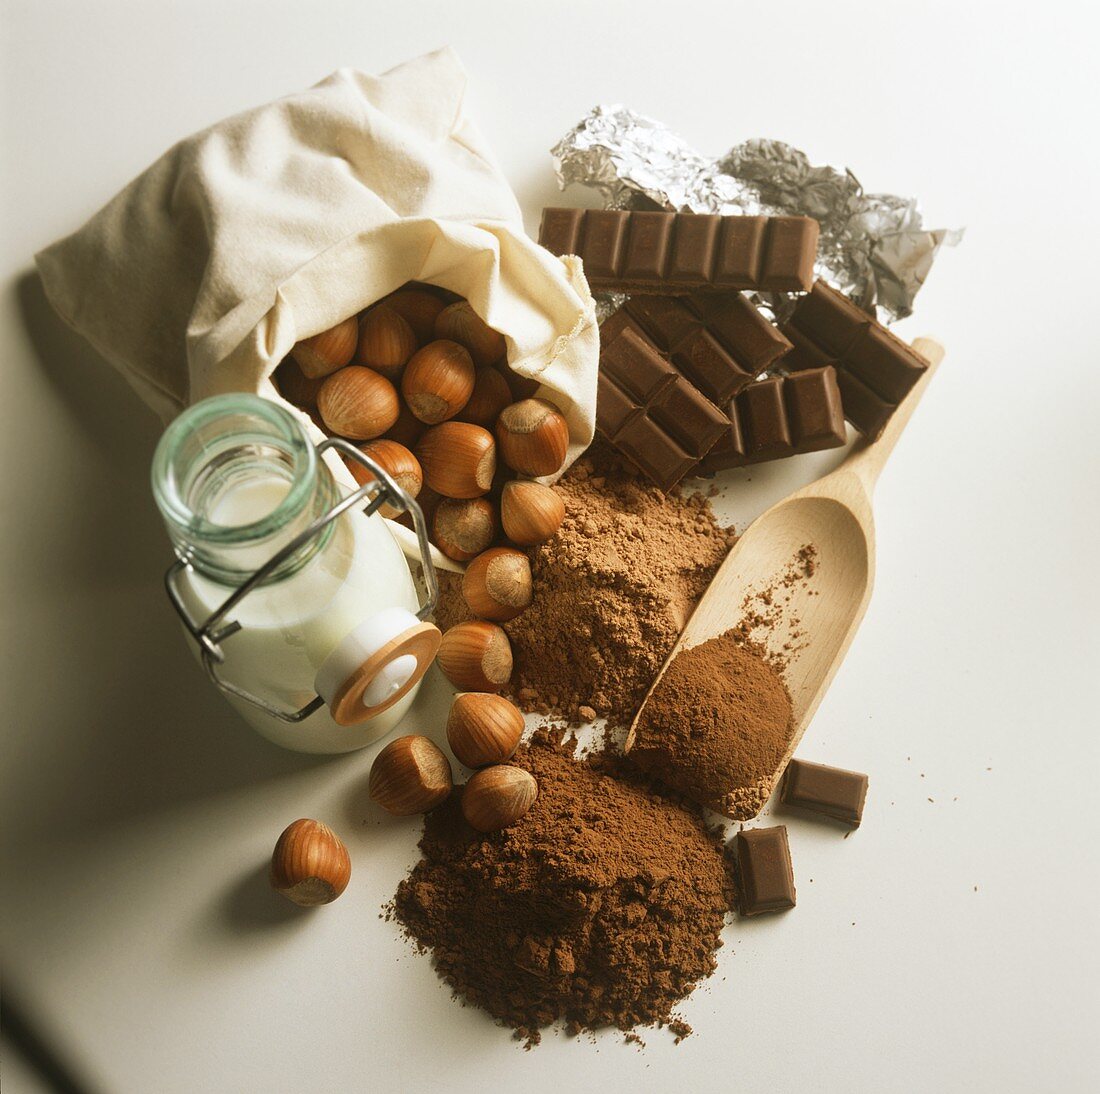 Ingredients for chocolate